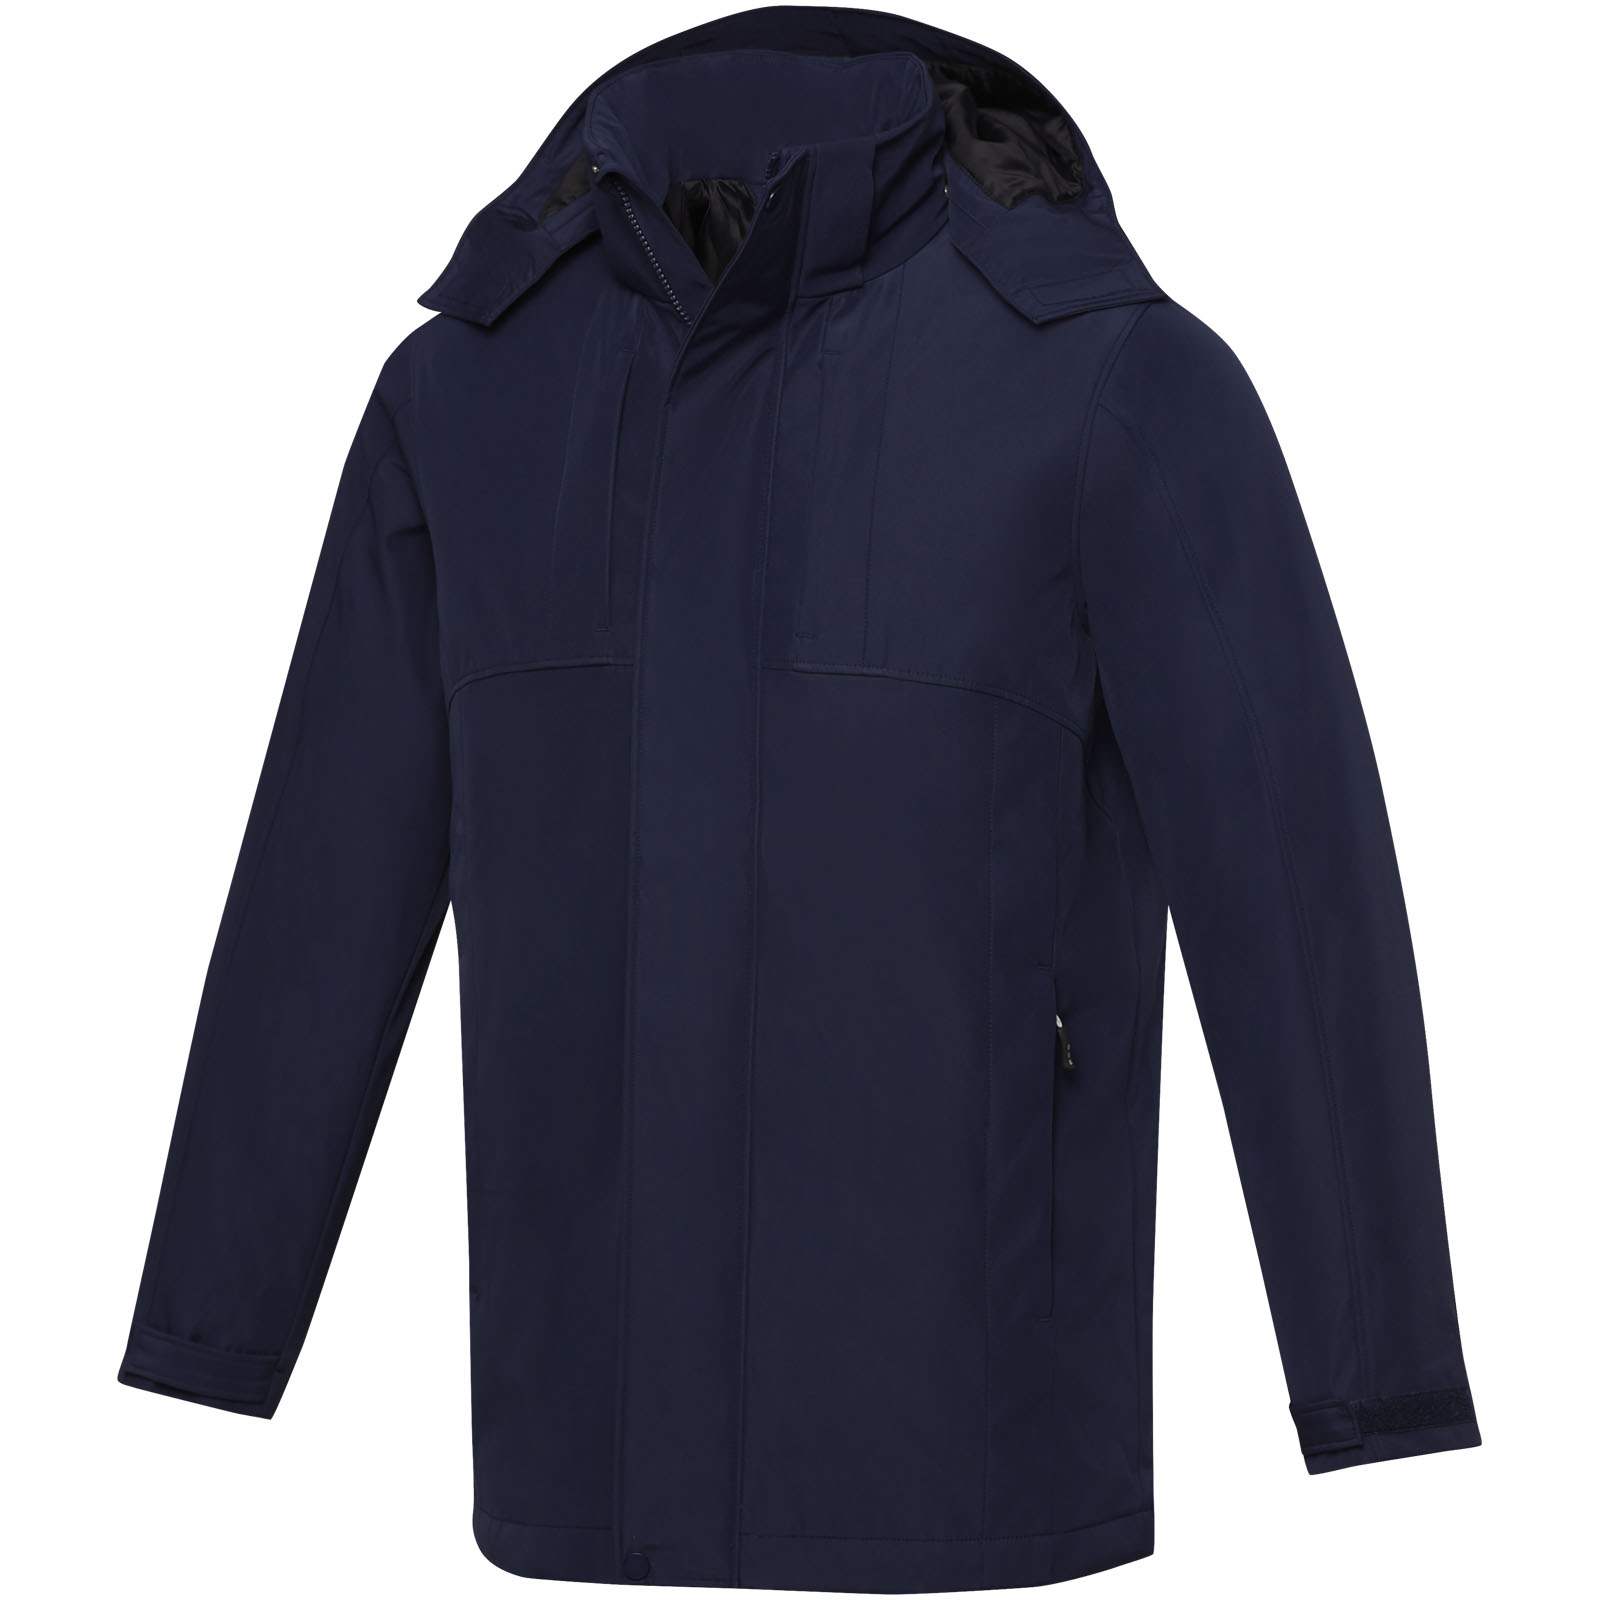 Clothing - Hardy men's insulated parka